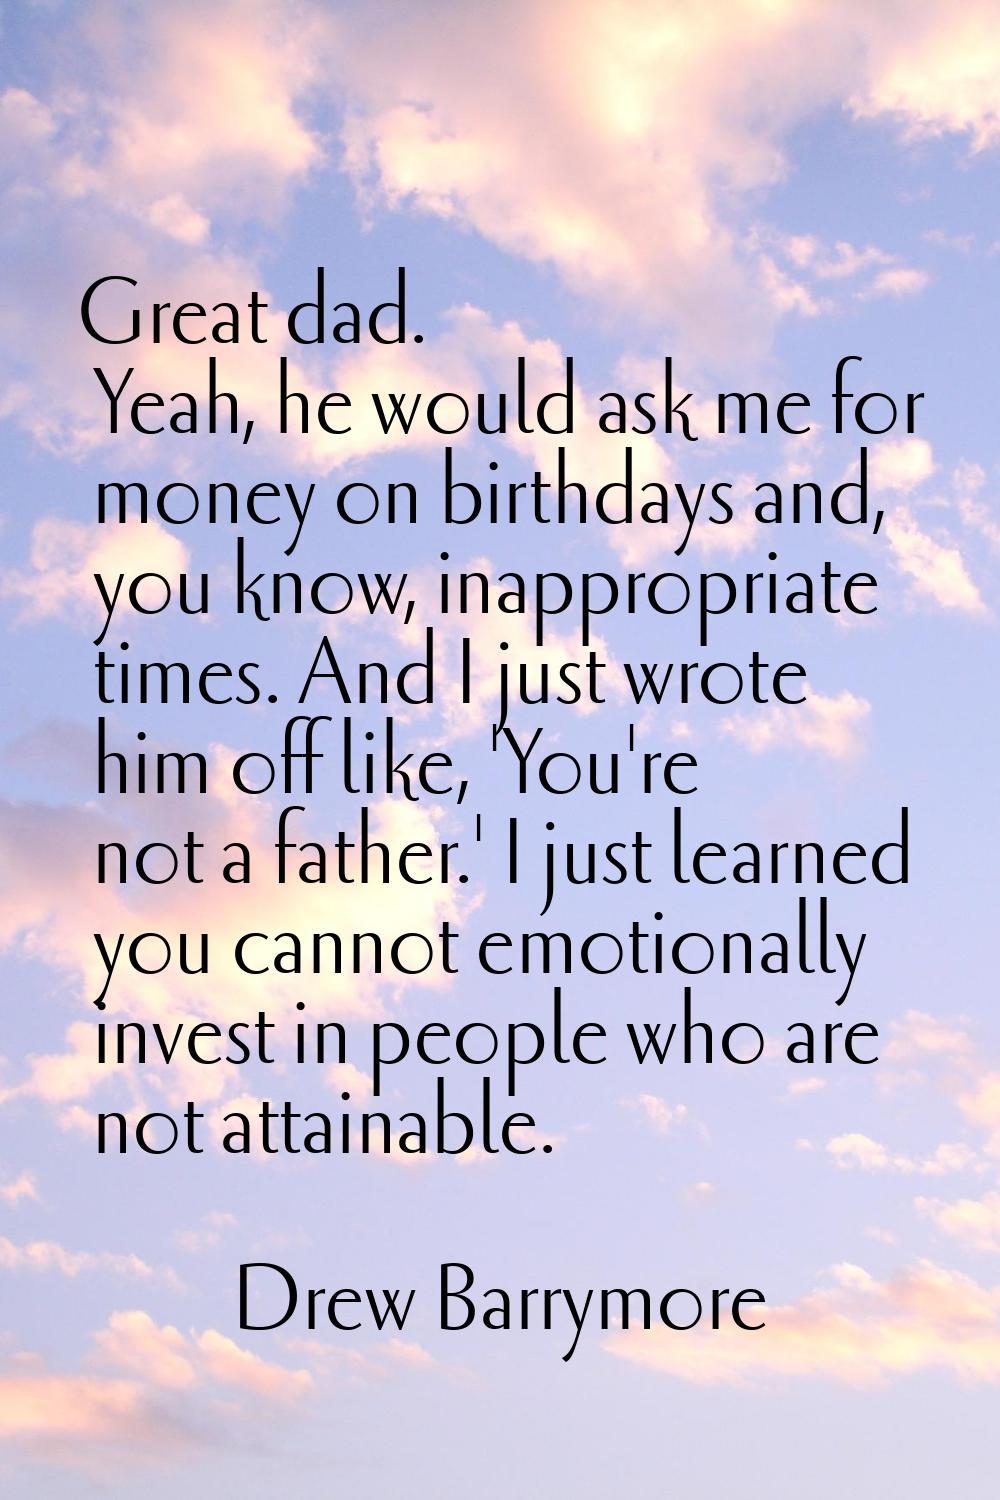 Great dad. Yeah, he would ask me for money on birthdays and, you know, inappropriate times. And I j